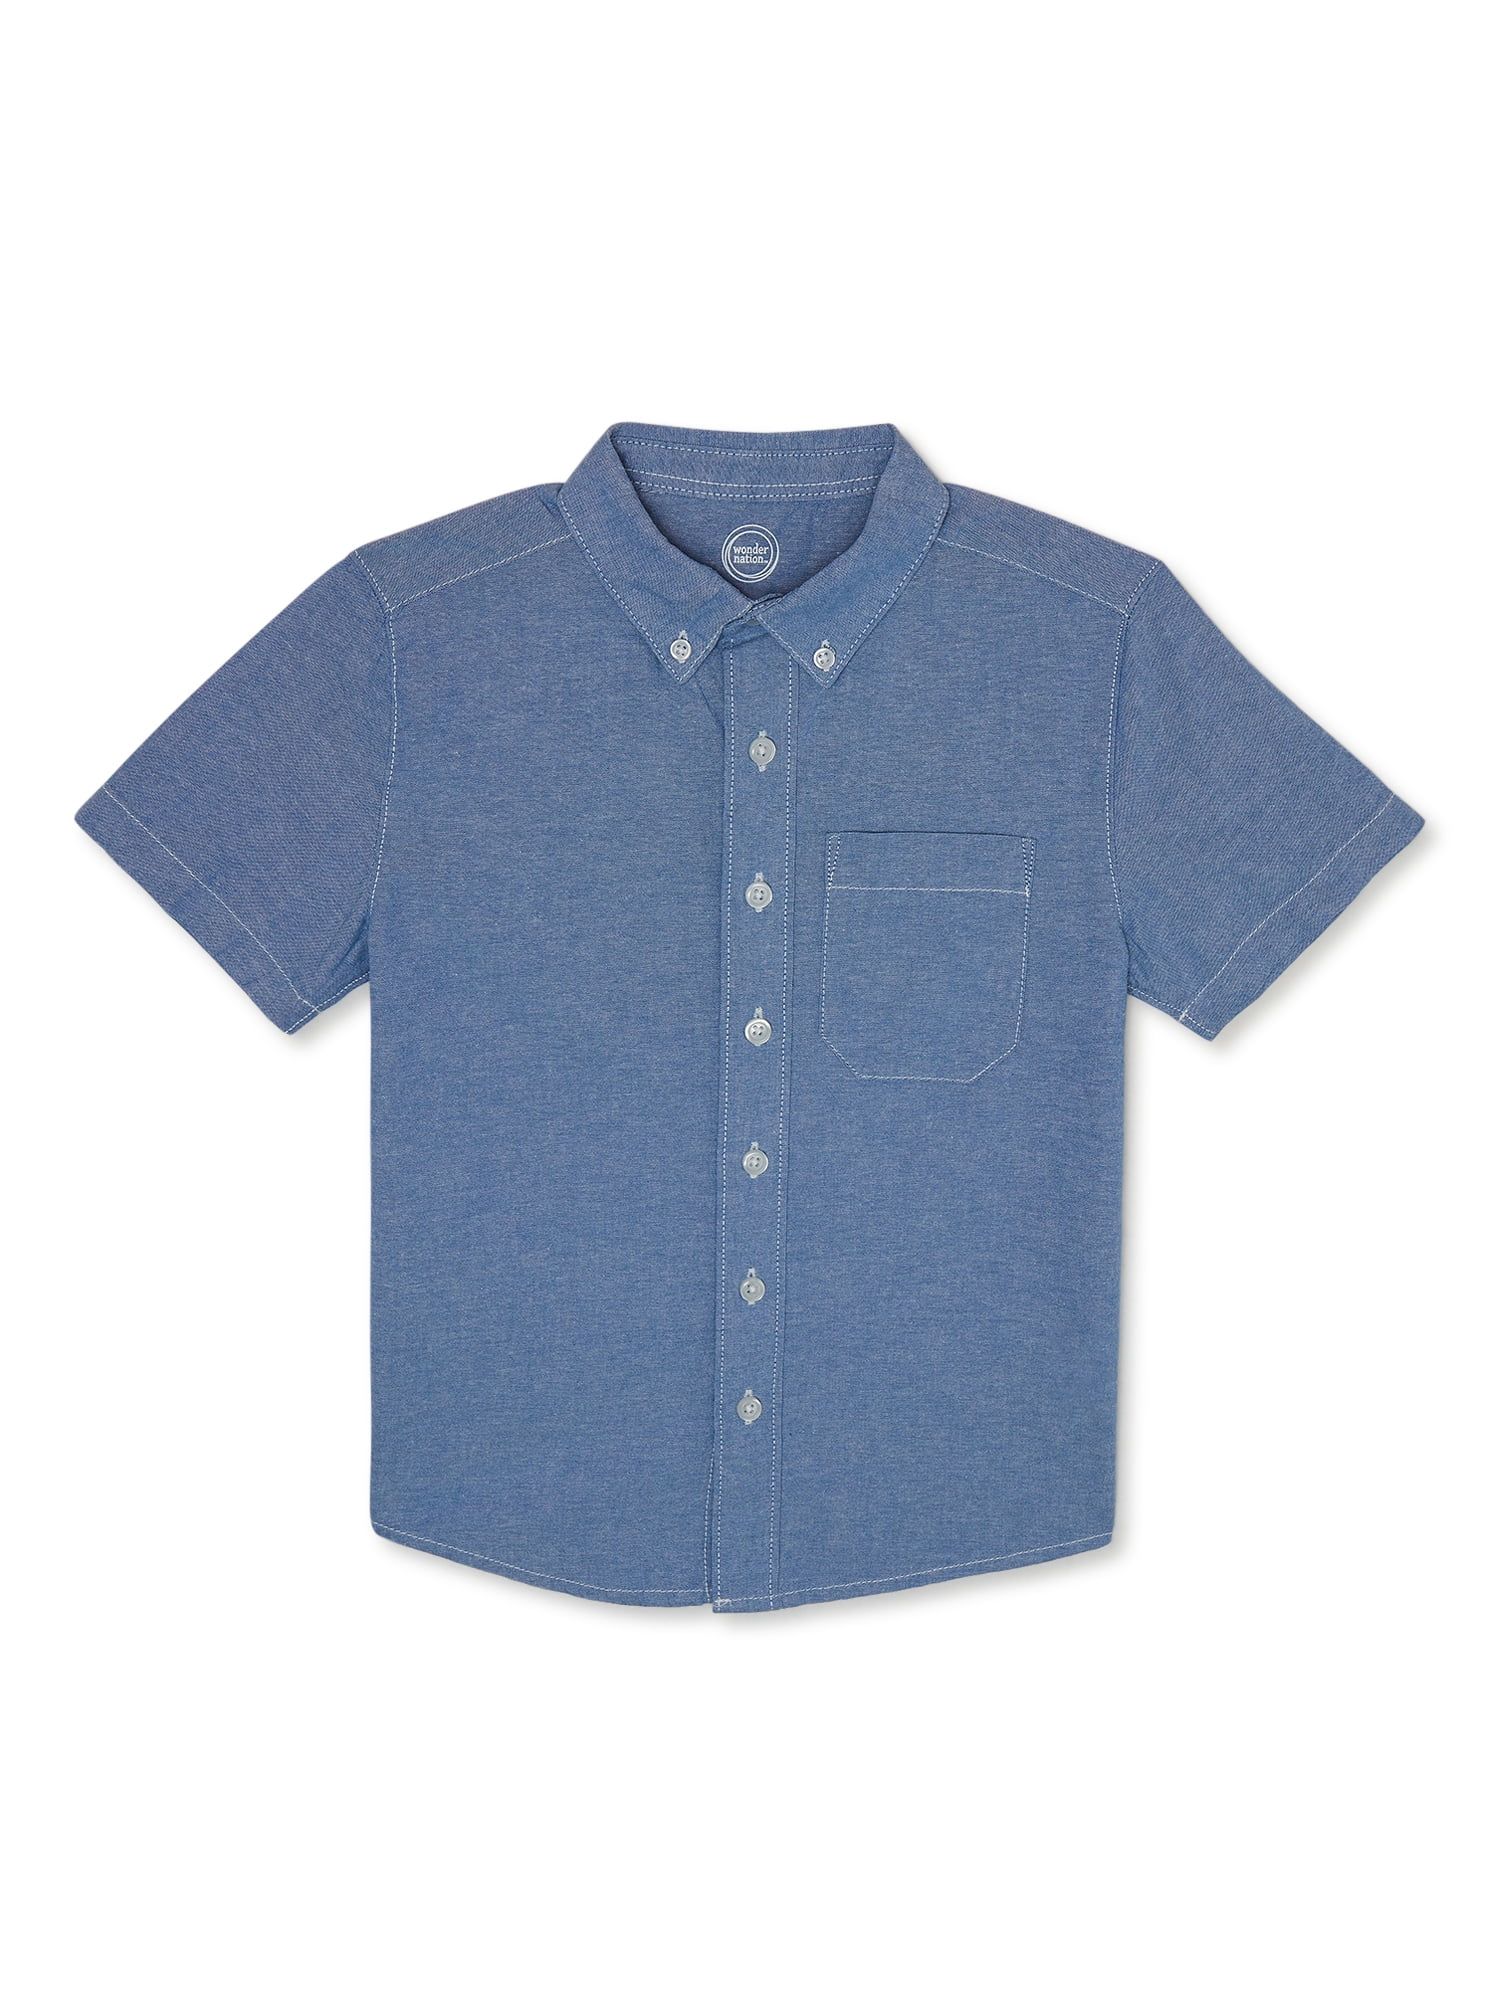 Wonder Nation Boys Woven Button Up T-Shirt with Short Sleeves, Sizes 4-12 & Husky | Walmart (US)